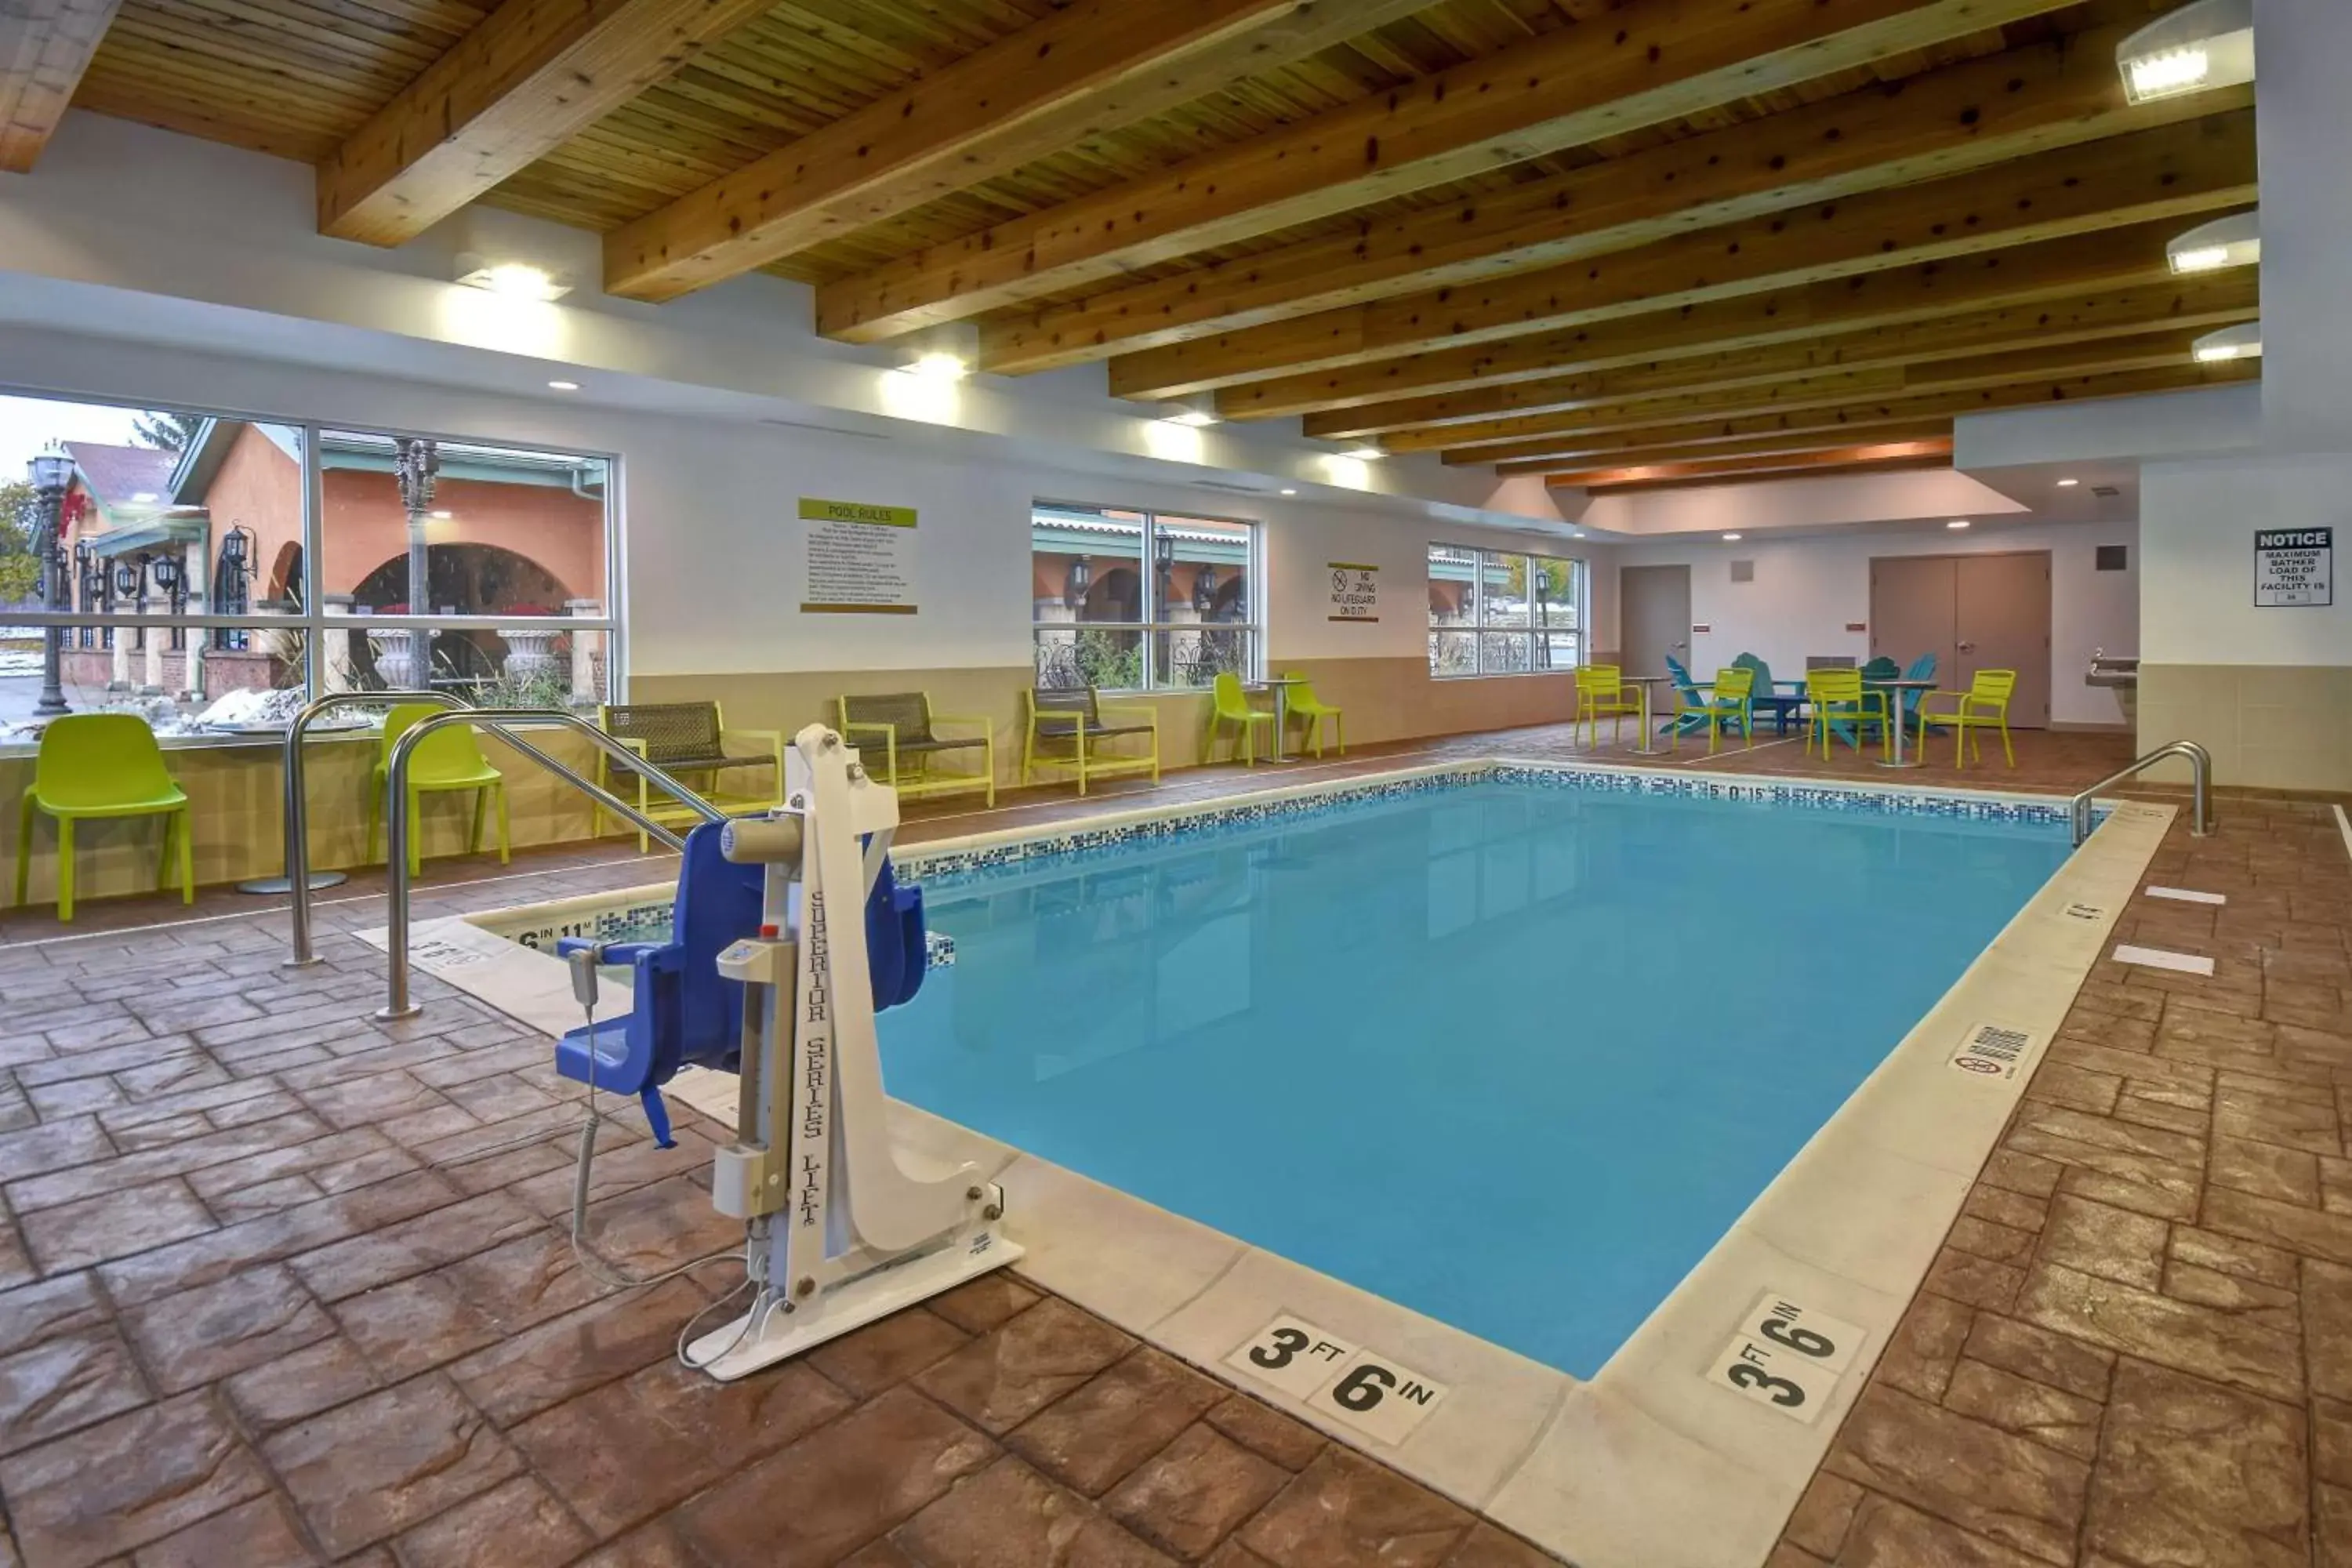 Swimming Pool in Home2 Suites Eau Claire South, Wi